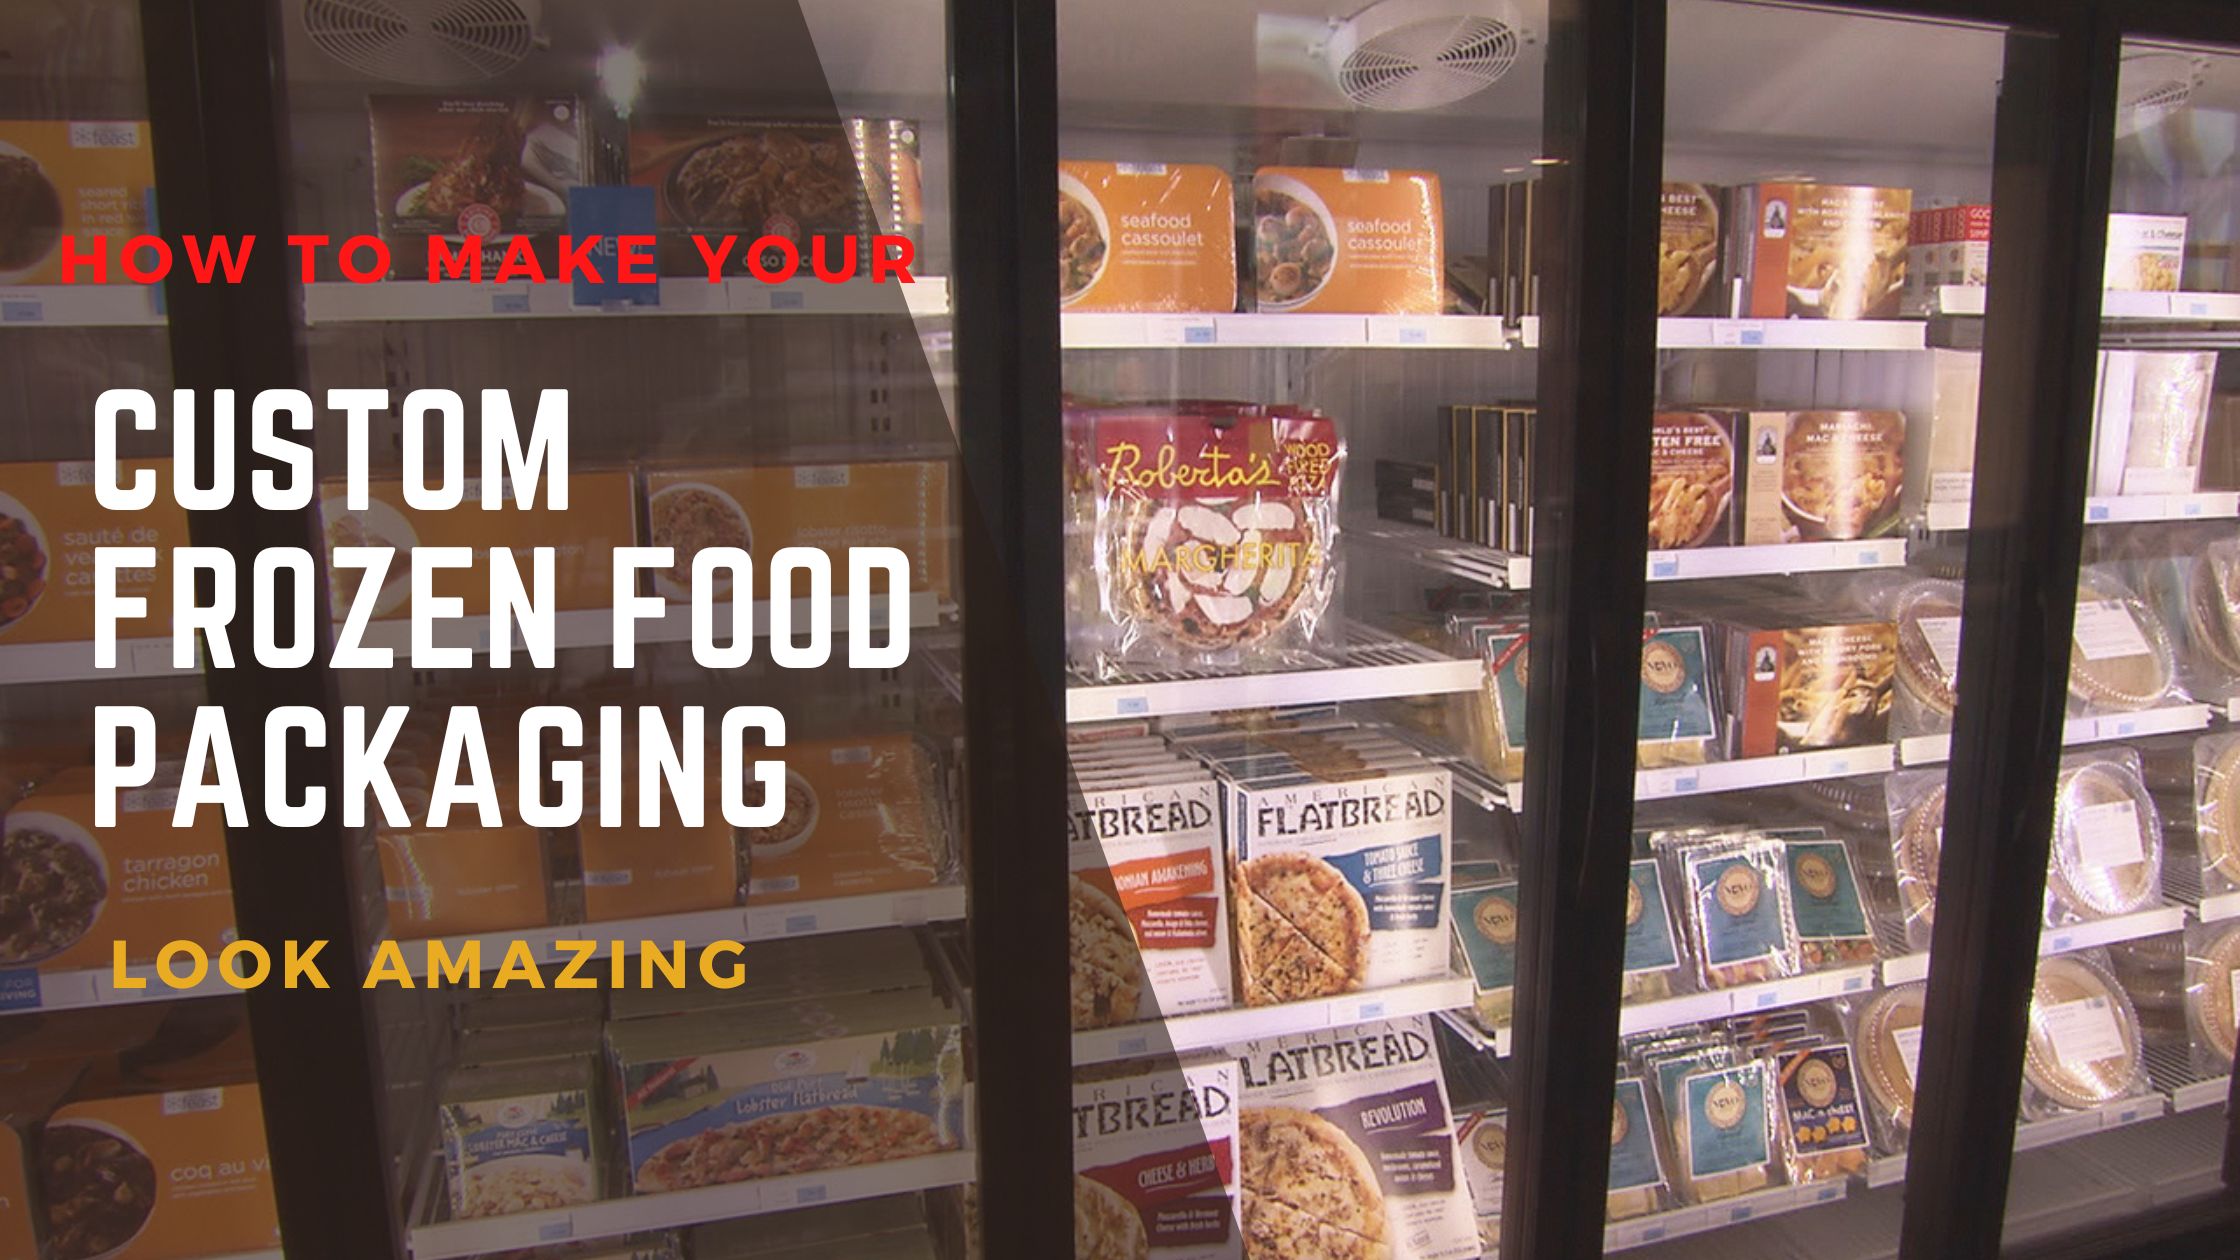 How To Make Your Custom Frozen Food Packaging Look Amazing